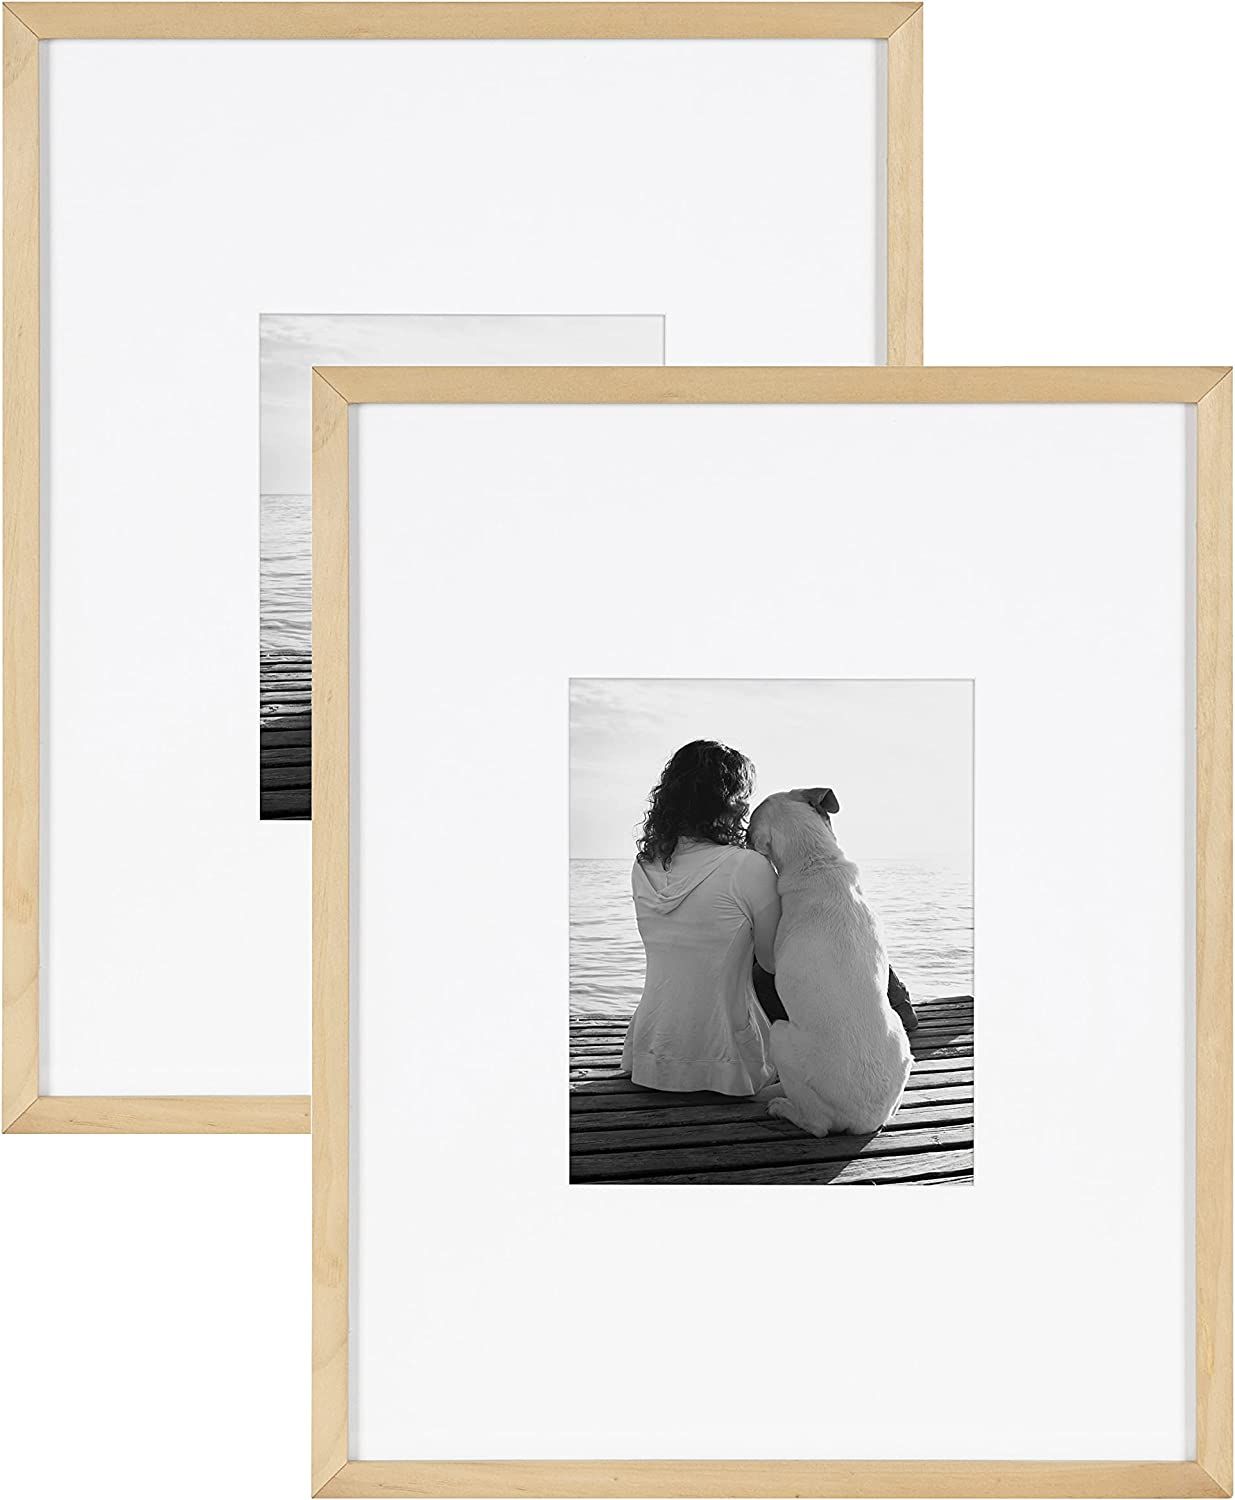 DesignOvation Gallery 16x20 matted to 8x10 Wood Picture Frame, Set of 2, Natural, 2 | Amazon (US)